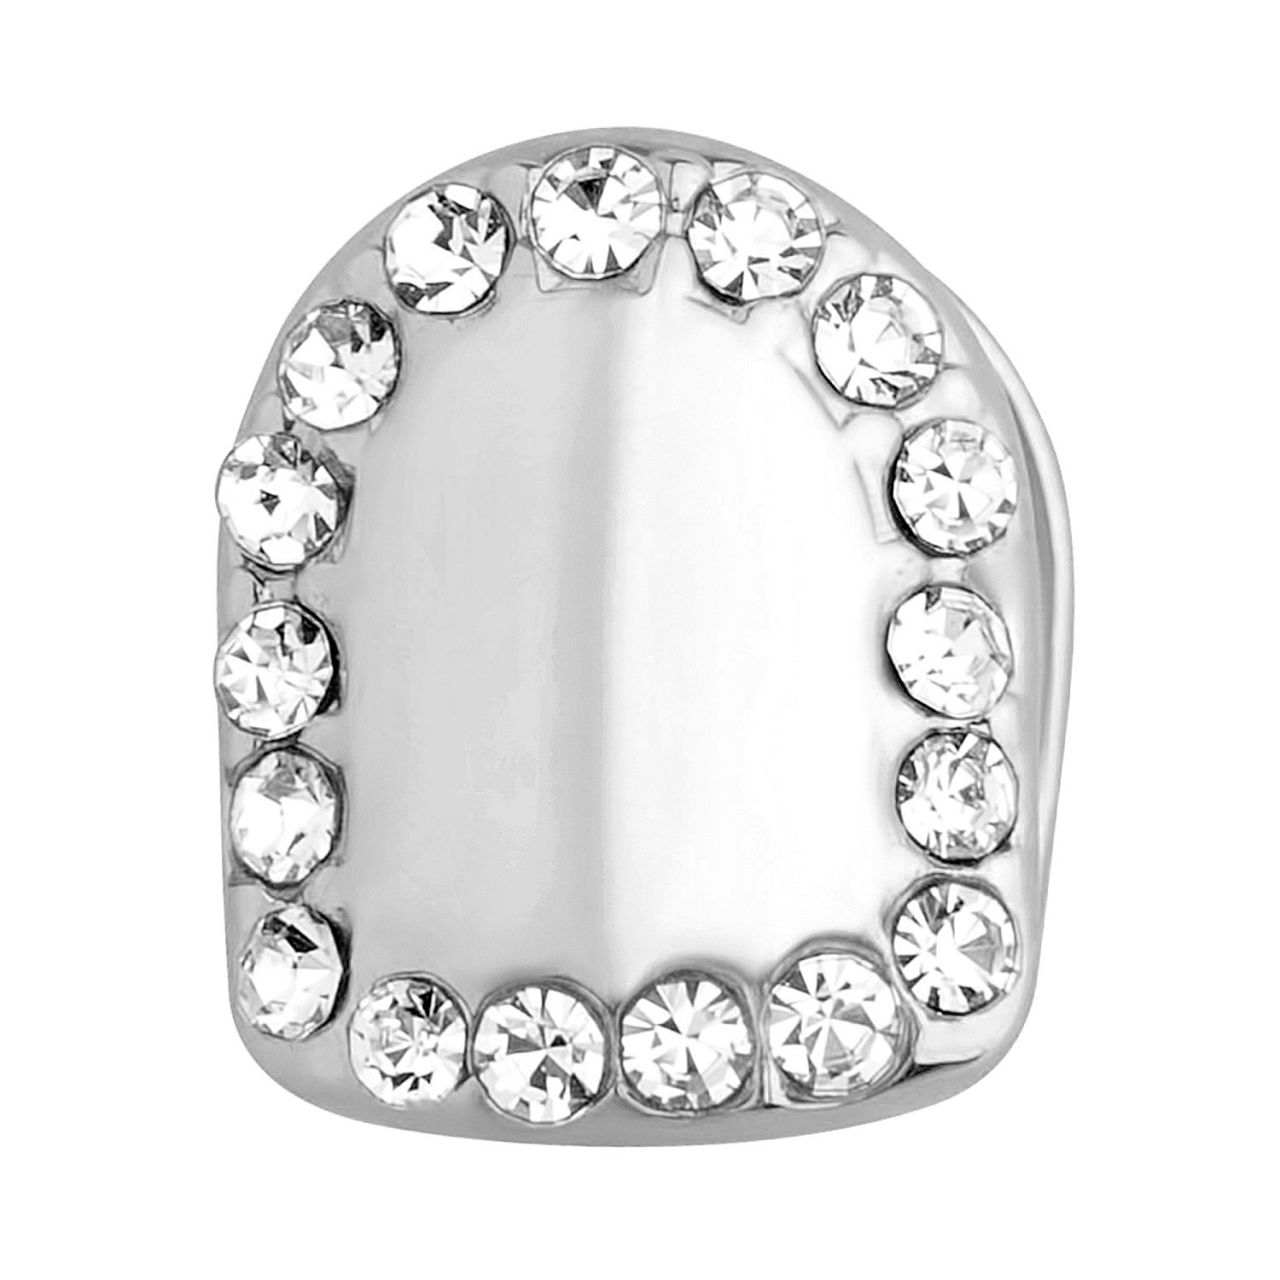 Iced 10x8mm Bling Grill - One size fits all Zahnaufsatz